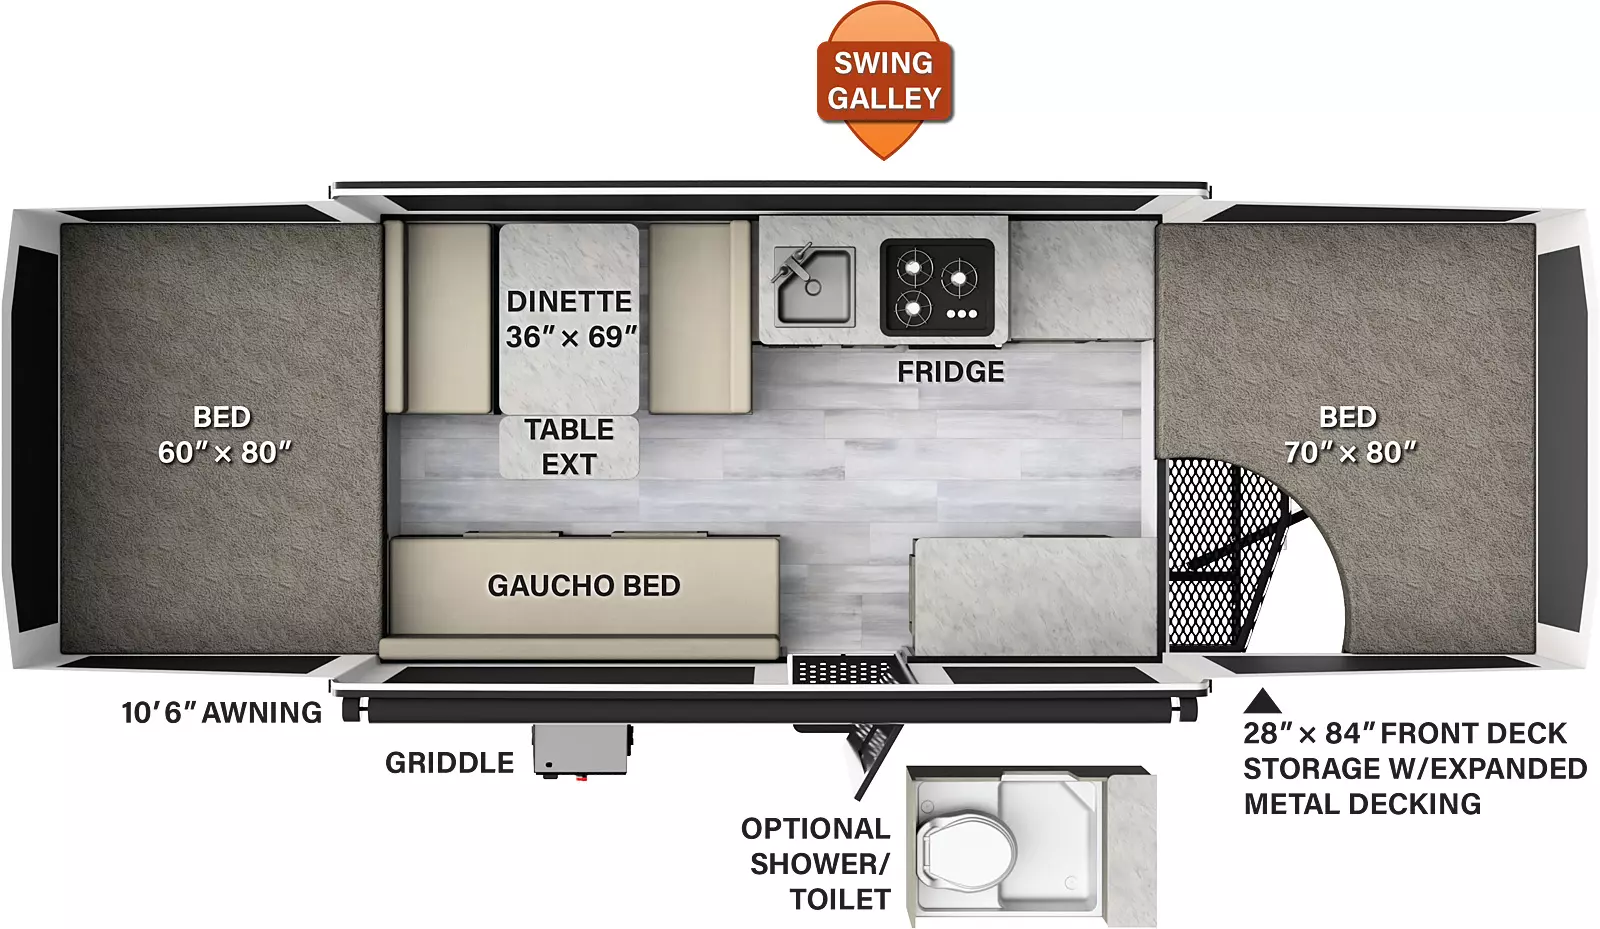 The 228BHSE has no slide outs and one entry door. Exterior features include a 10 foot 6 inch awning, griddle, and front deck storage with expanded metal decking. Interior layout from front to back: front tent bed; off-door side countertop, swing galley with cooktop, sink and refrigerator, and dinette with table extension; door side countertop, entry, and gaucho bed; rear tent bed. Optional shower/toilet available.